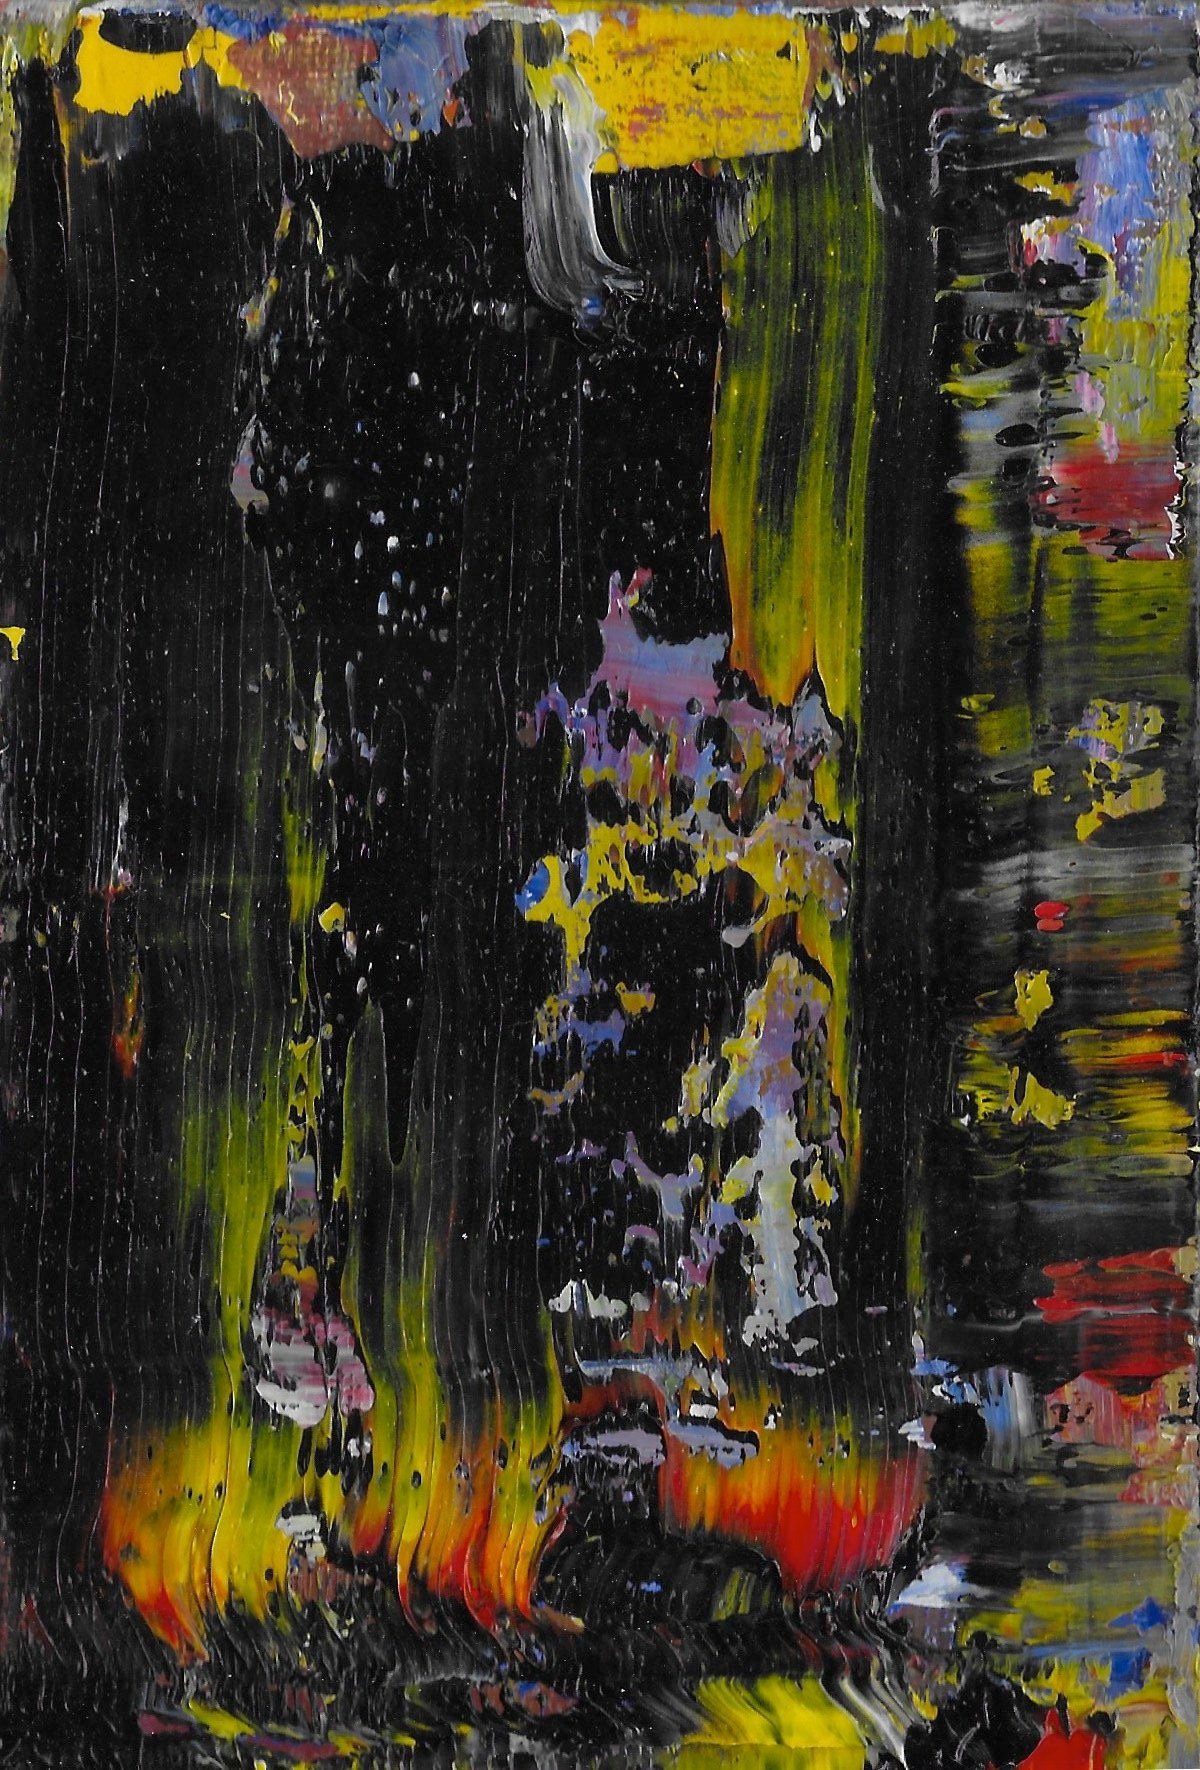  Abstract #23  Oil on panel. 10cm x 15cm (4in x 6in.) 2022. Maxime Mballa-Tagny.   Click here to inquire.  